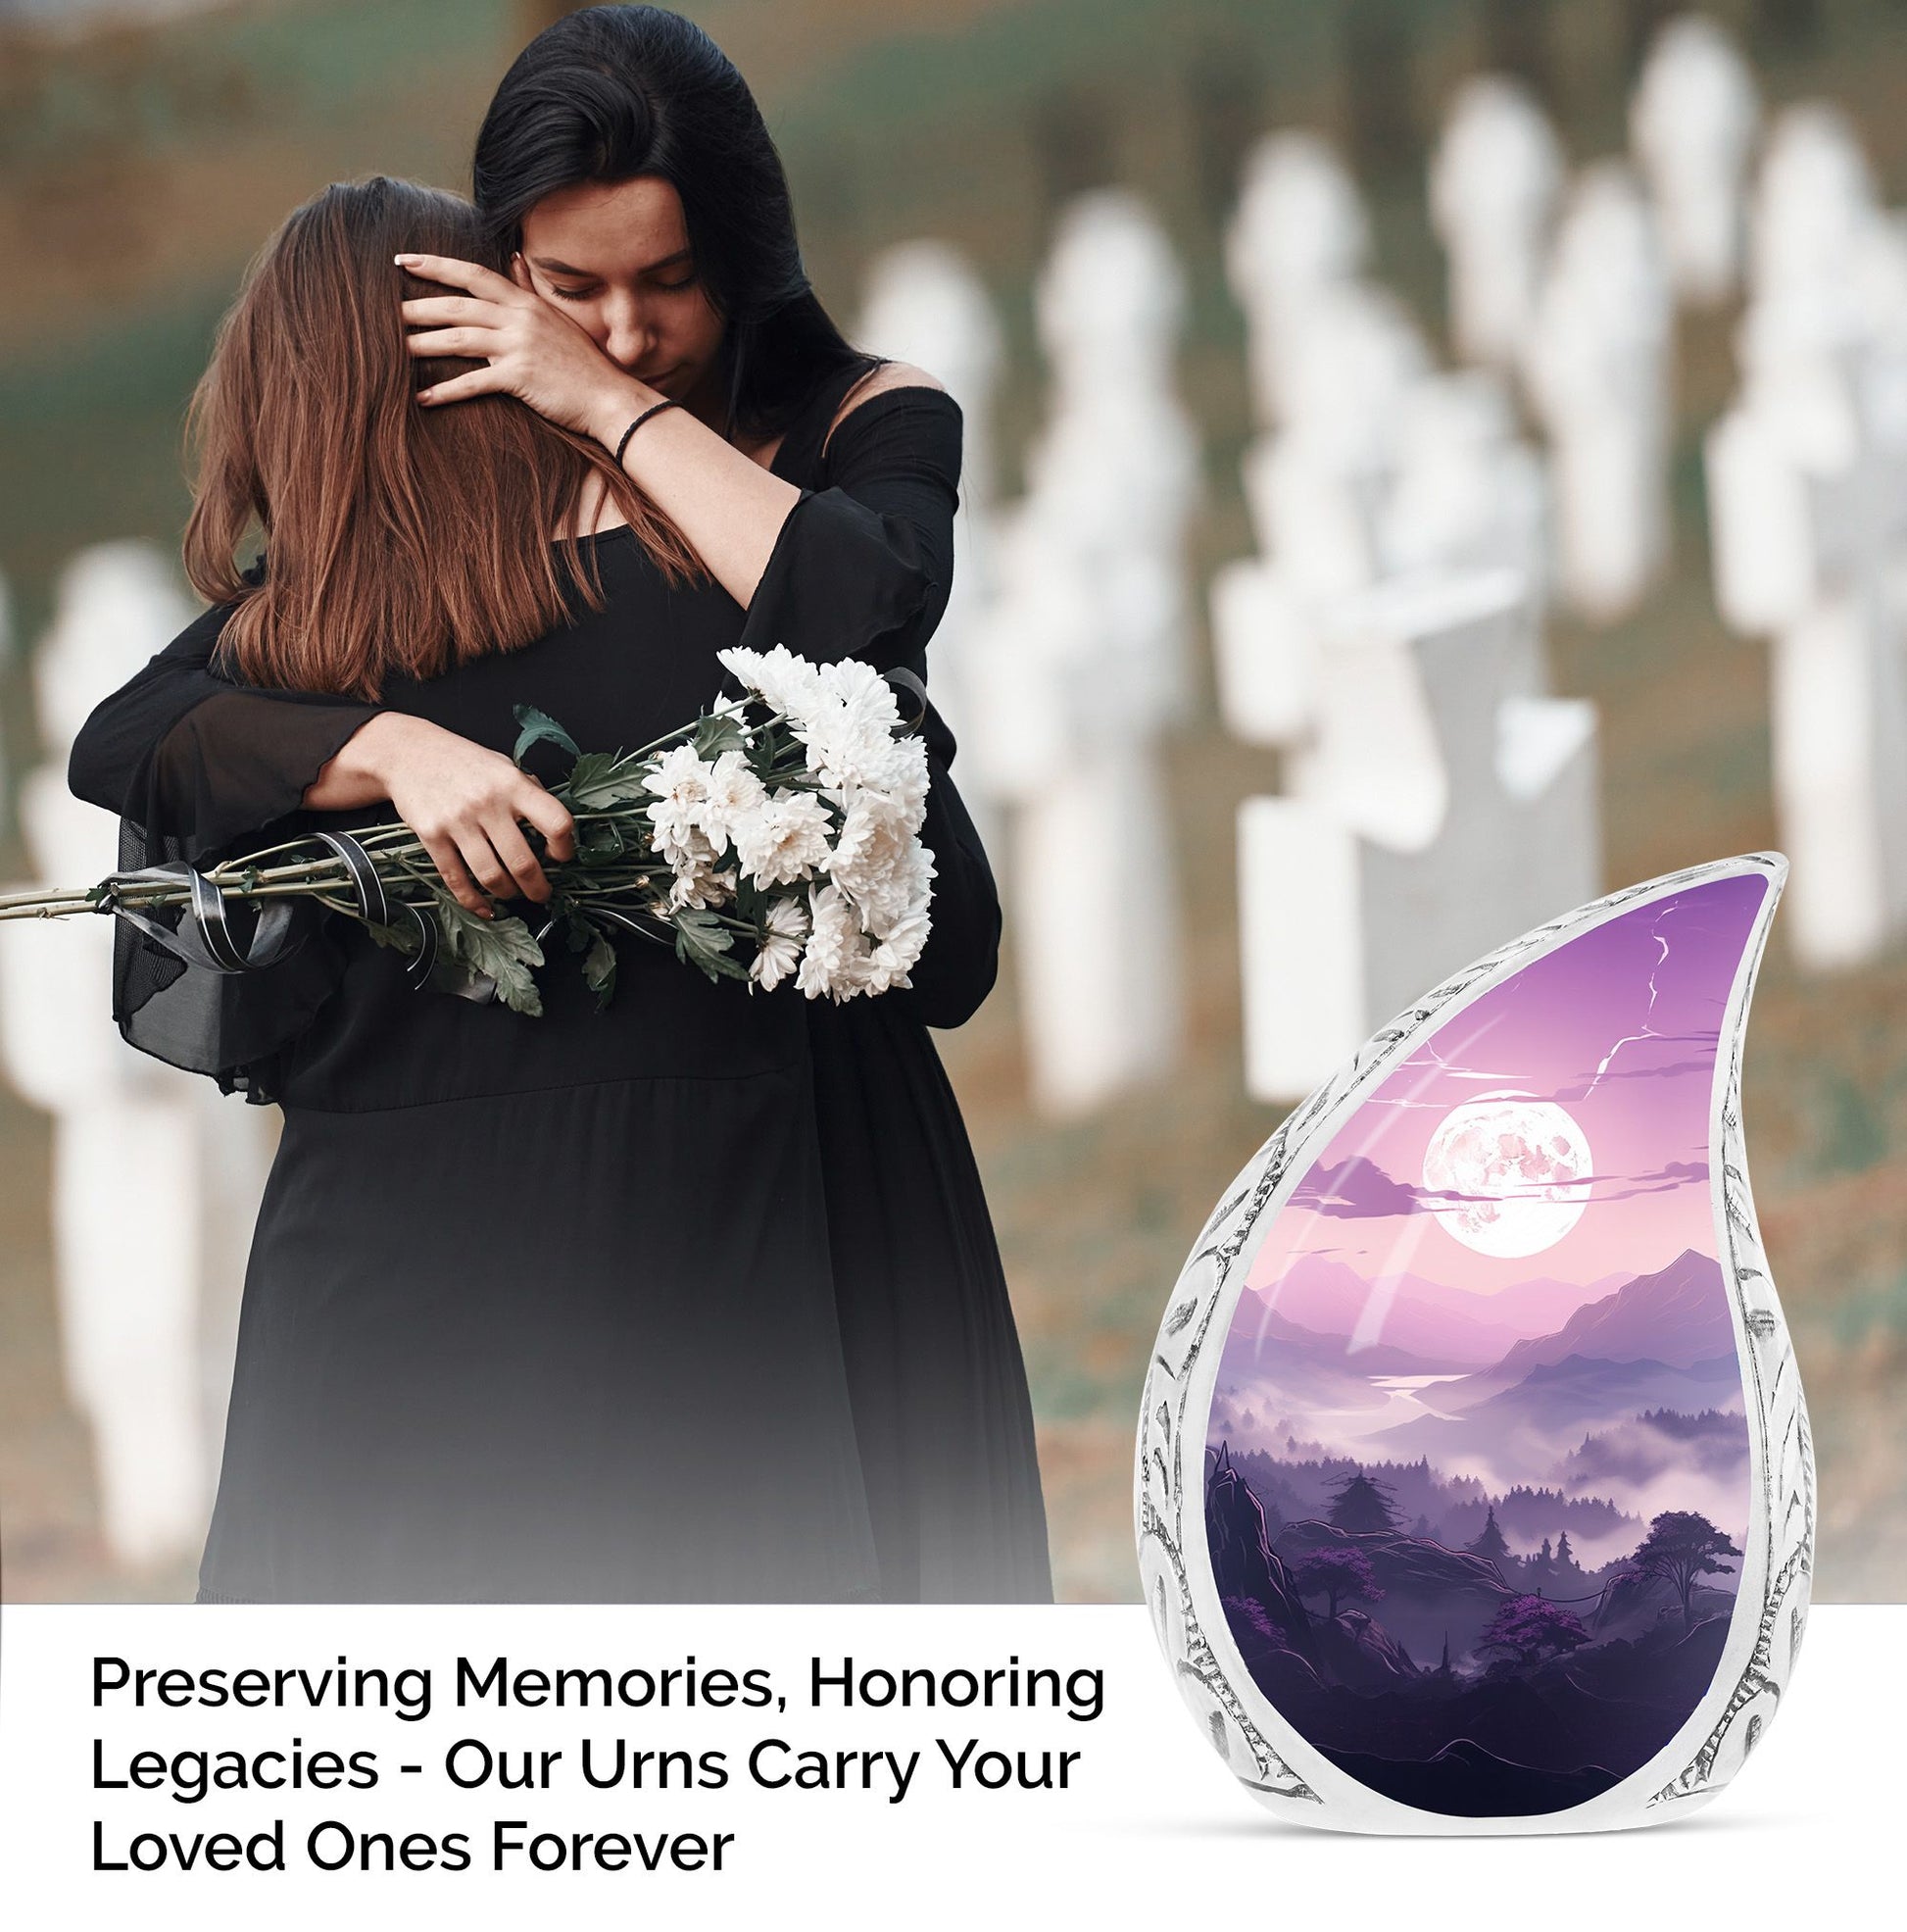 Teardrop cremation urn themed with mountains, ideal for storing dad's ashes. Suitable as a small funeral urn.